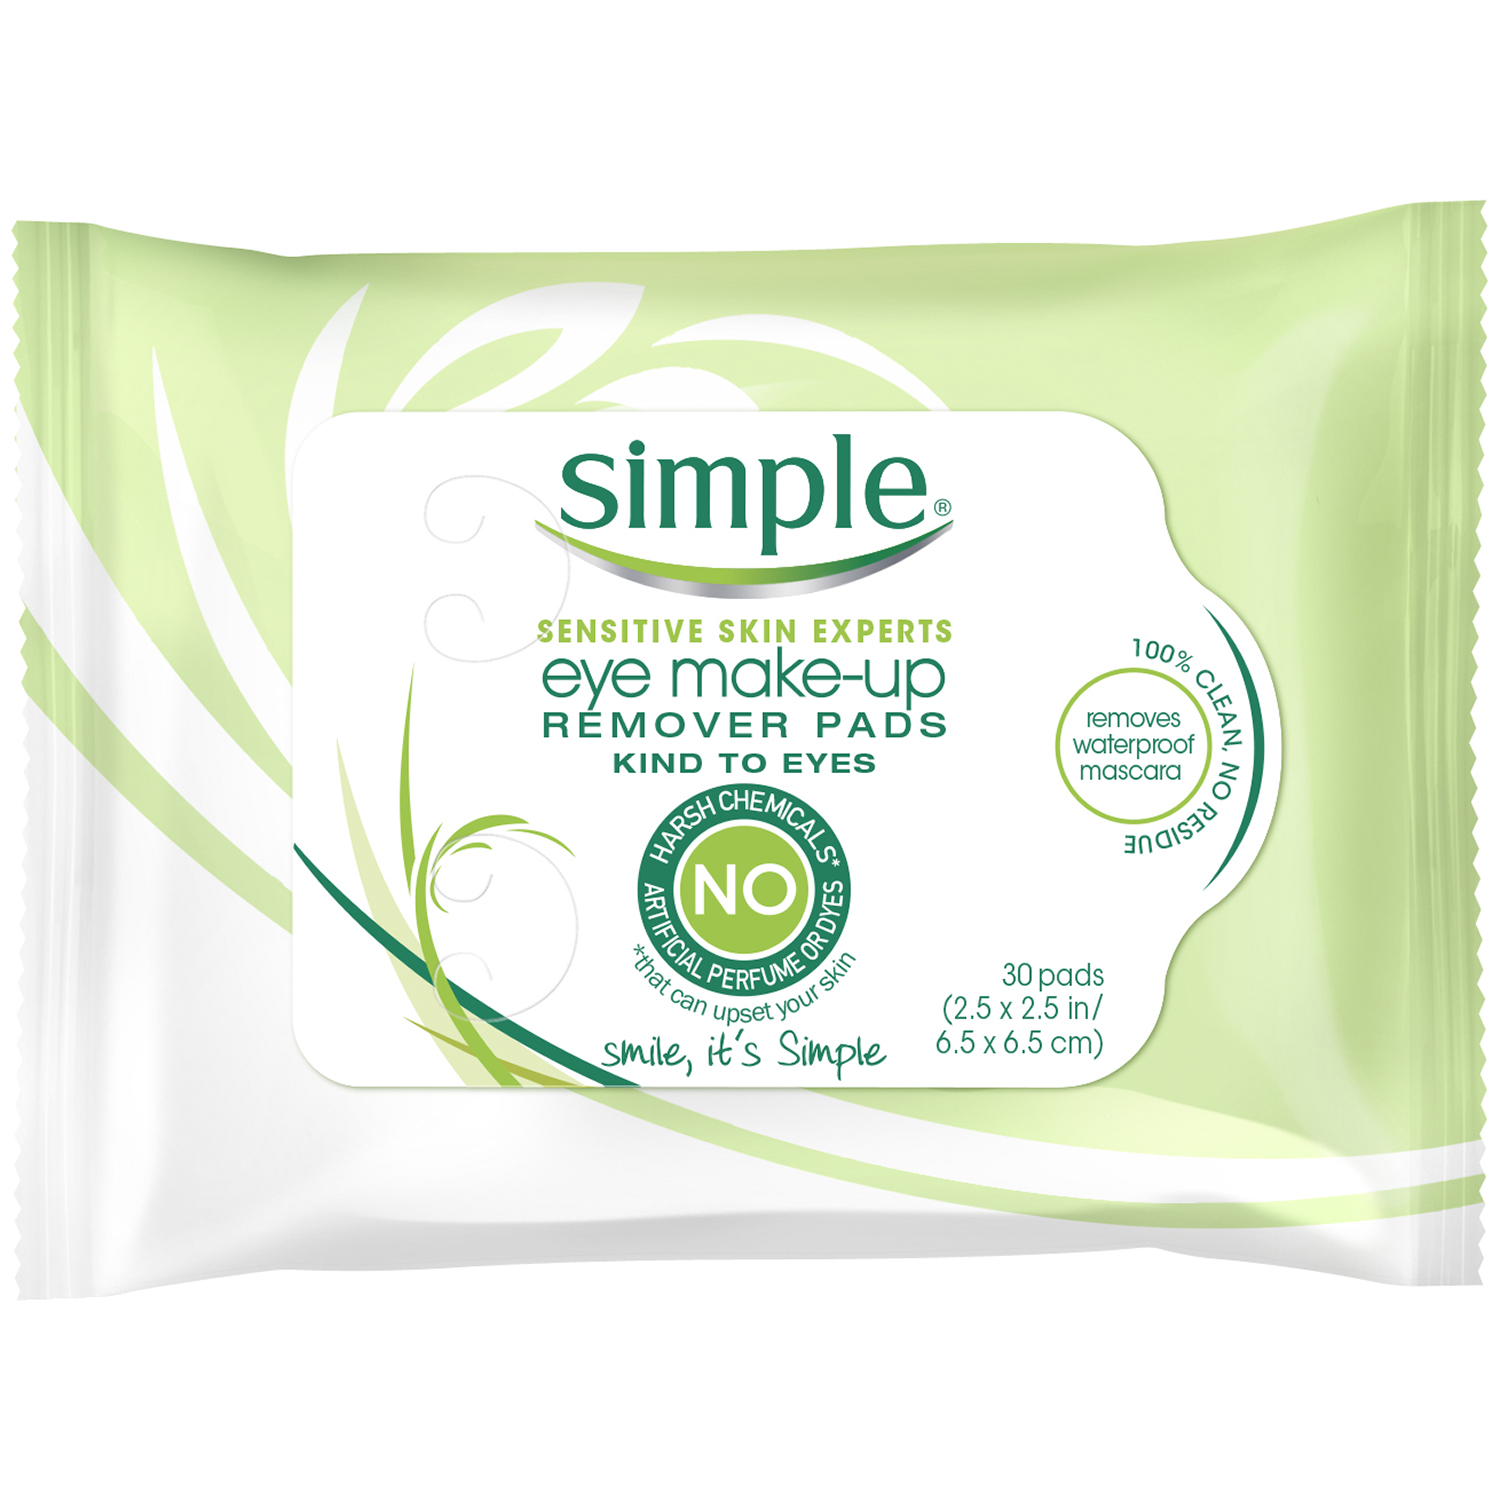 Simple Eye Make-Up Remover Pads 30 ct